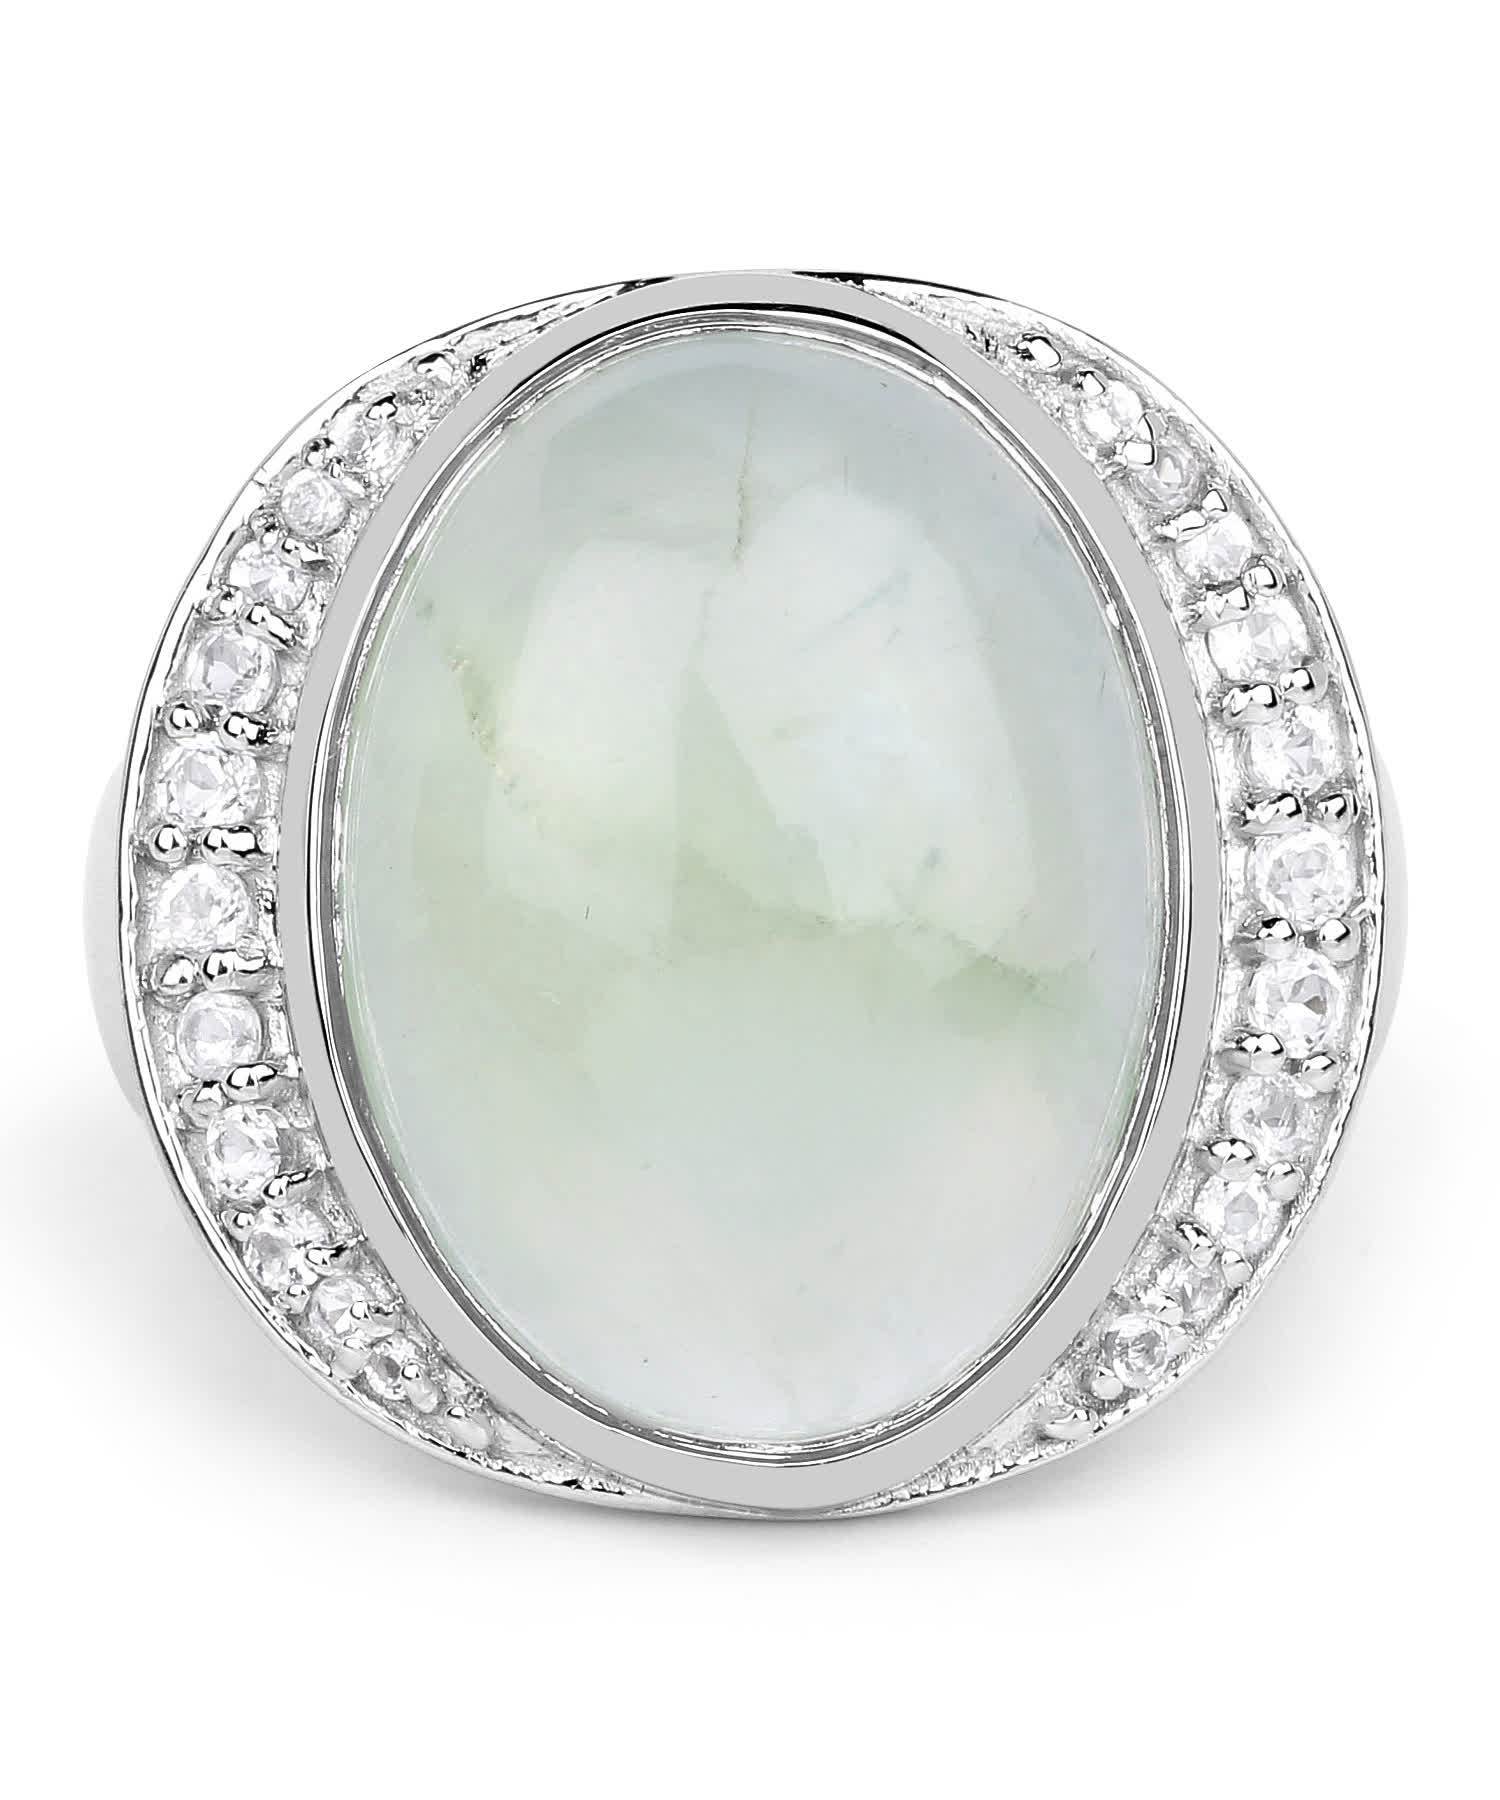 11.50ctw Natural Prehnite and Topaz Rhodium Plated 925 Sterling Silver Oval Cocktail Ring View 3